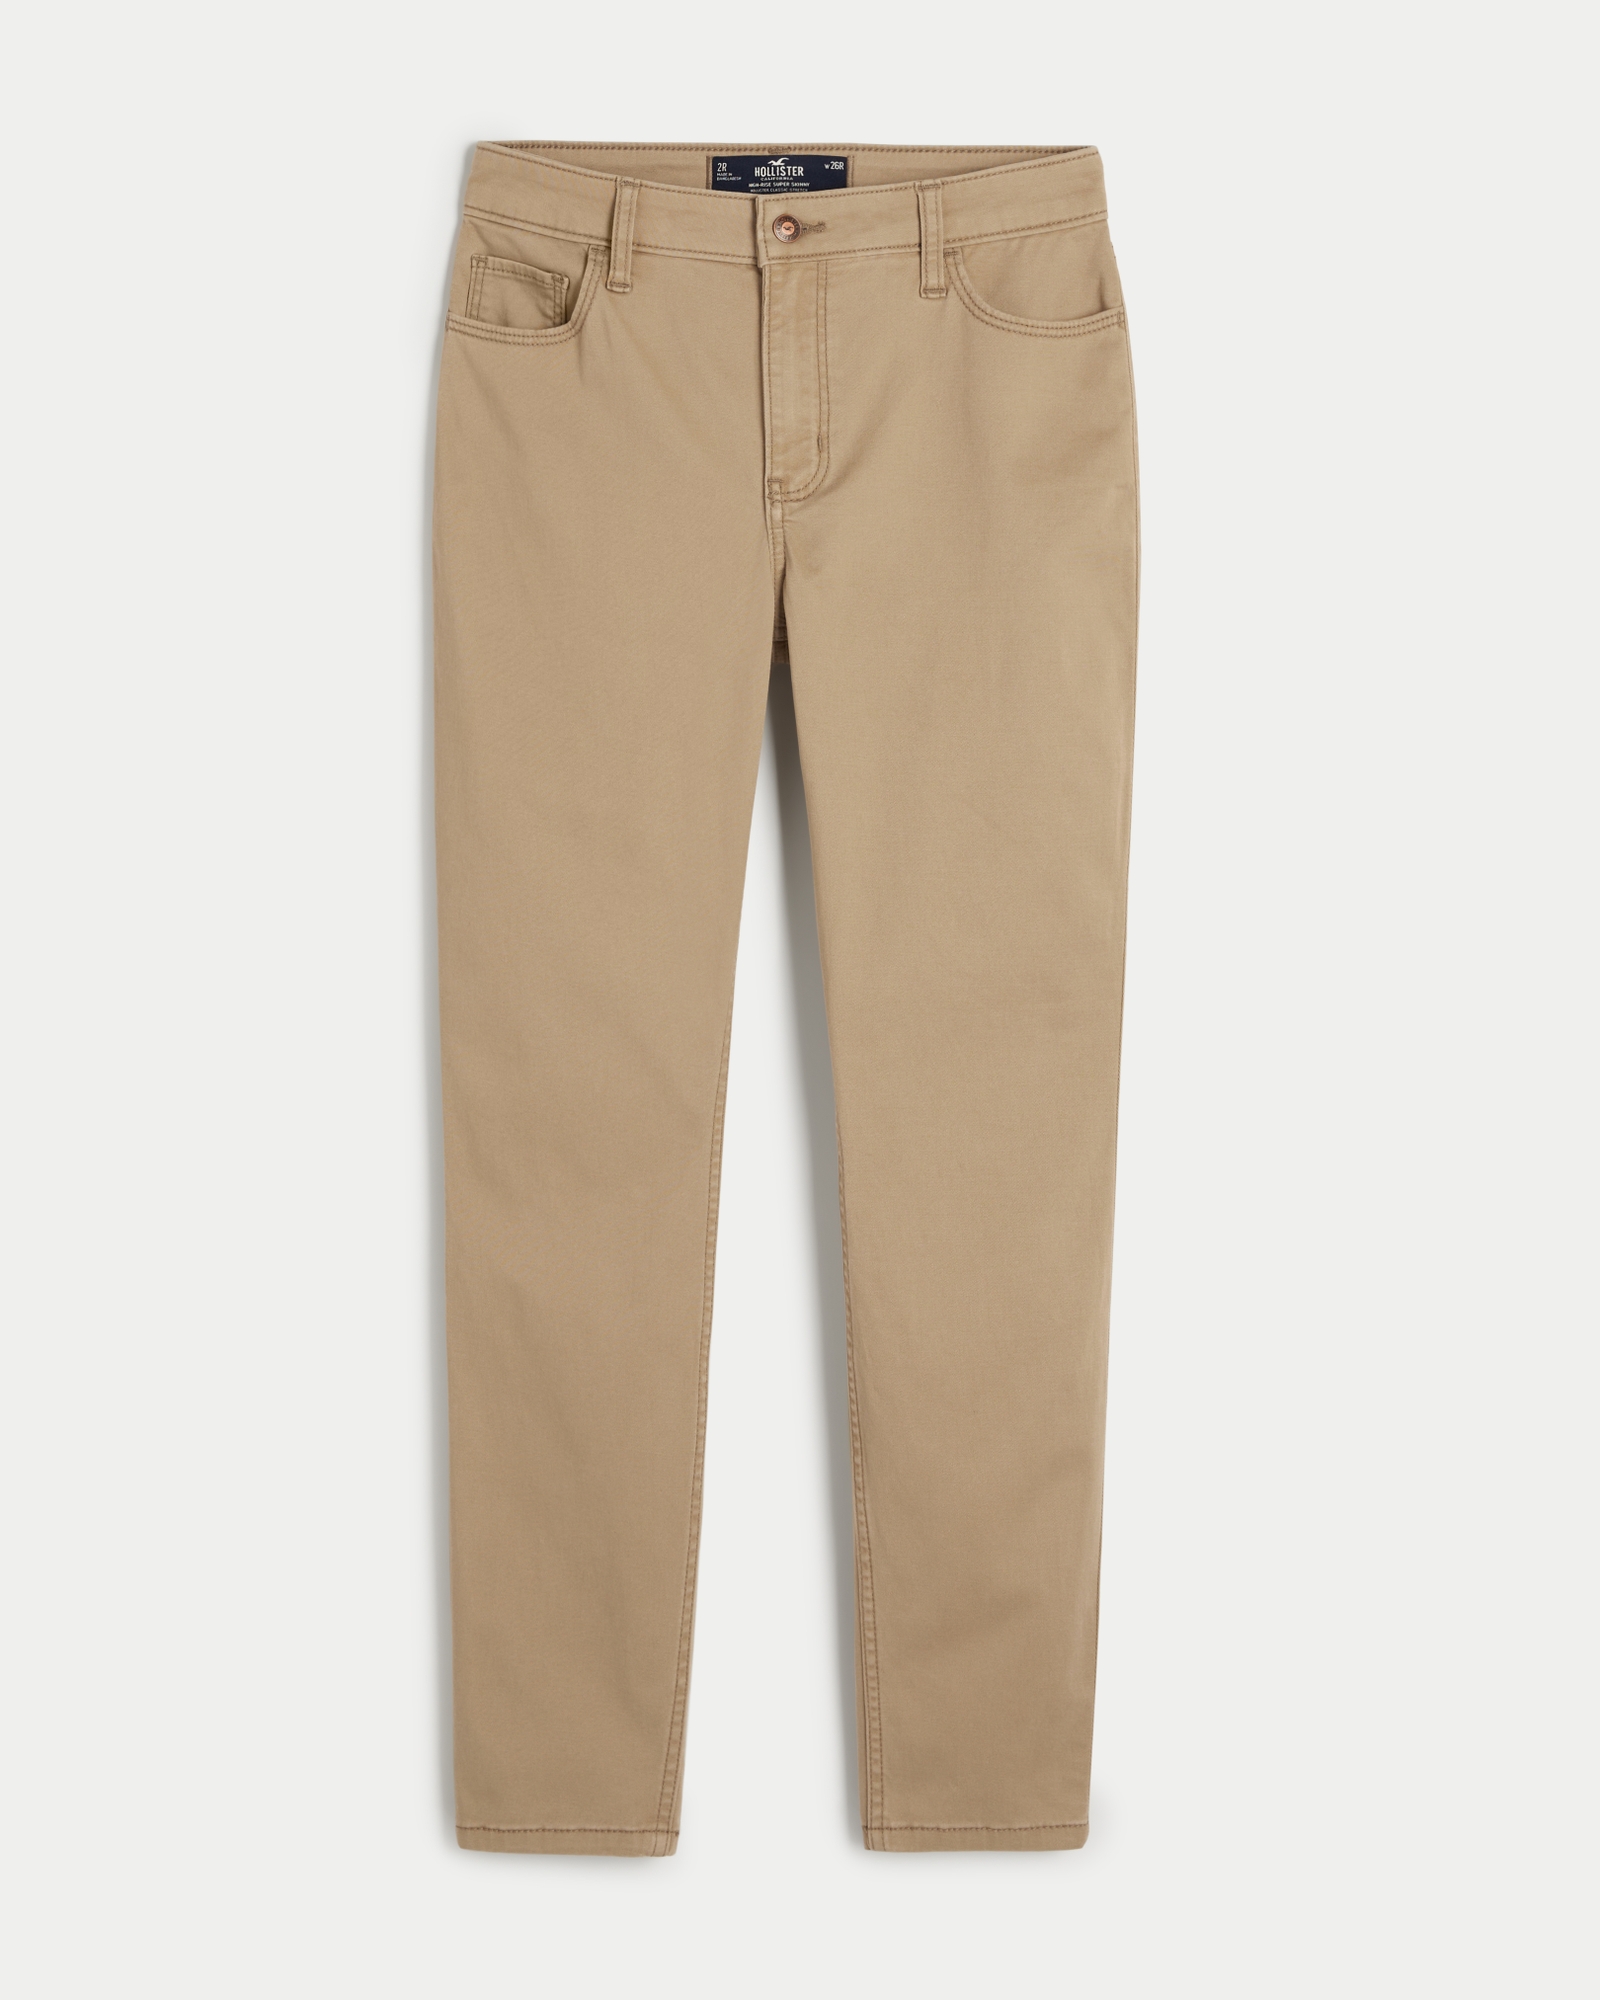 https://img.hollisterco.com/is/image/anf/KIC_355-2344-0723-400_prod1.jpg?policy=product-extra-large